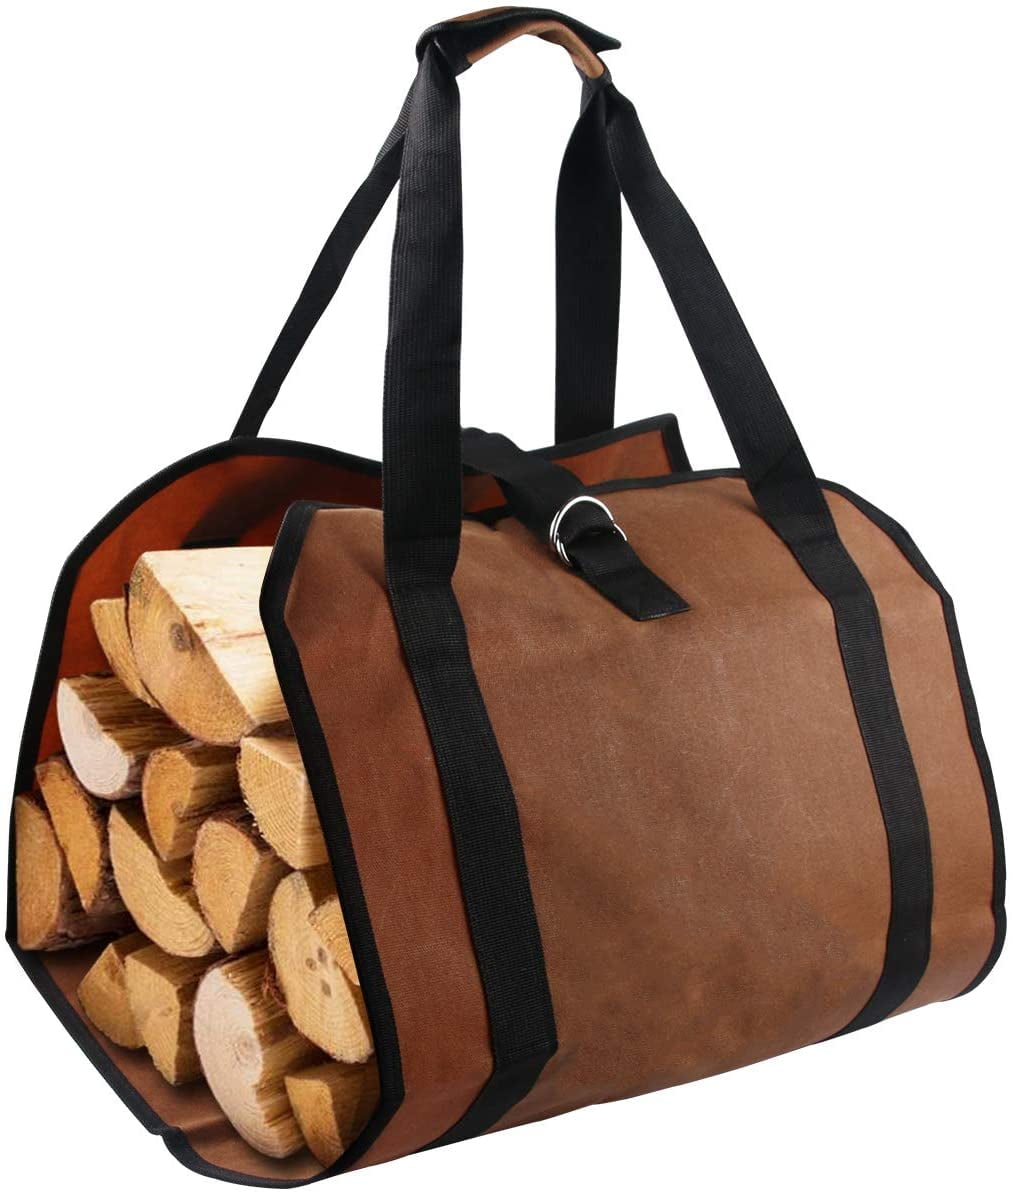 Wood Canvas Log Carrier Bag with Handles Heavy Duty Wood Carrying Bag Large Capacity Indoor Fireplace Firewood Storage Bag Firewood Bag Highly Durable Water & Dirt Resistant 